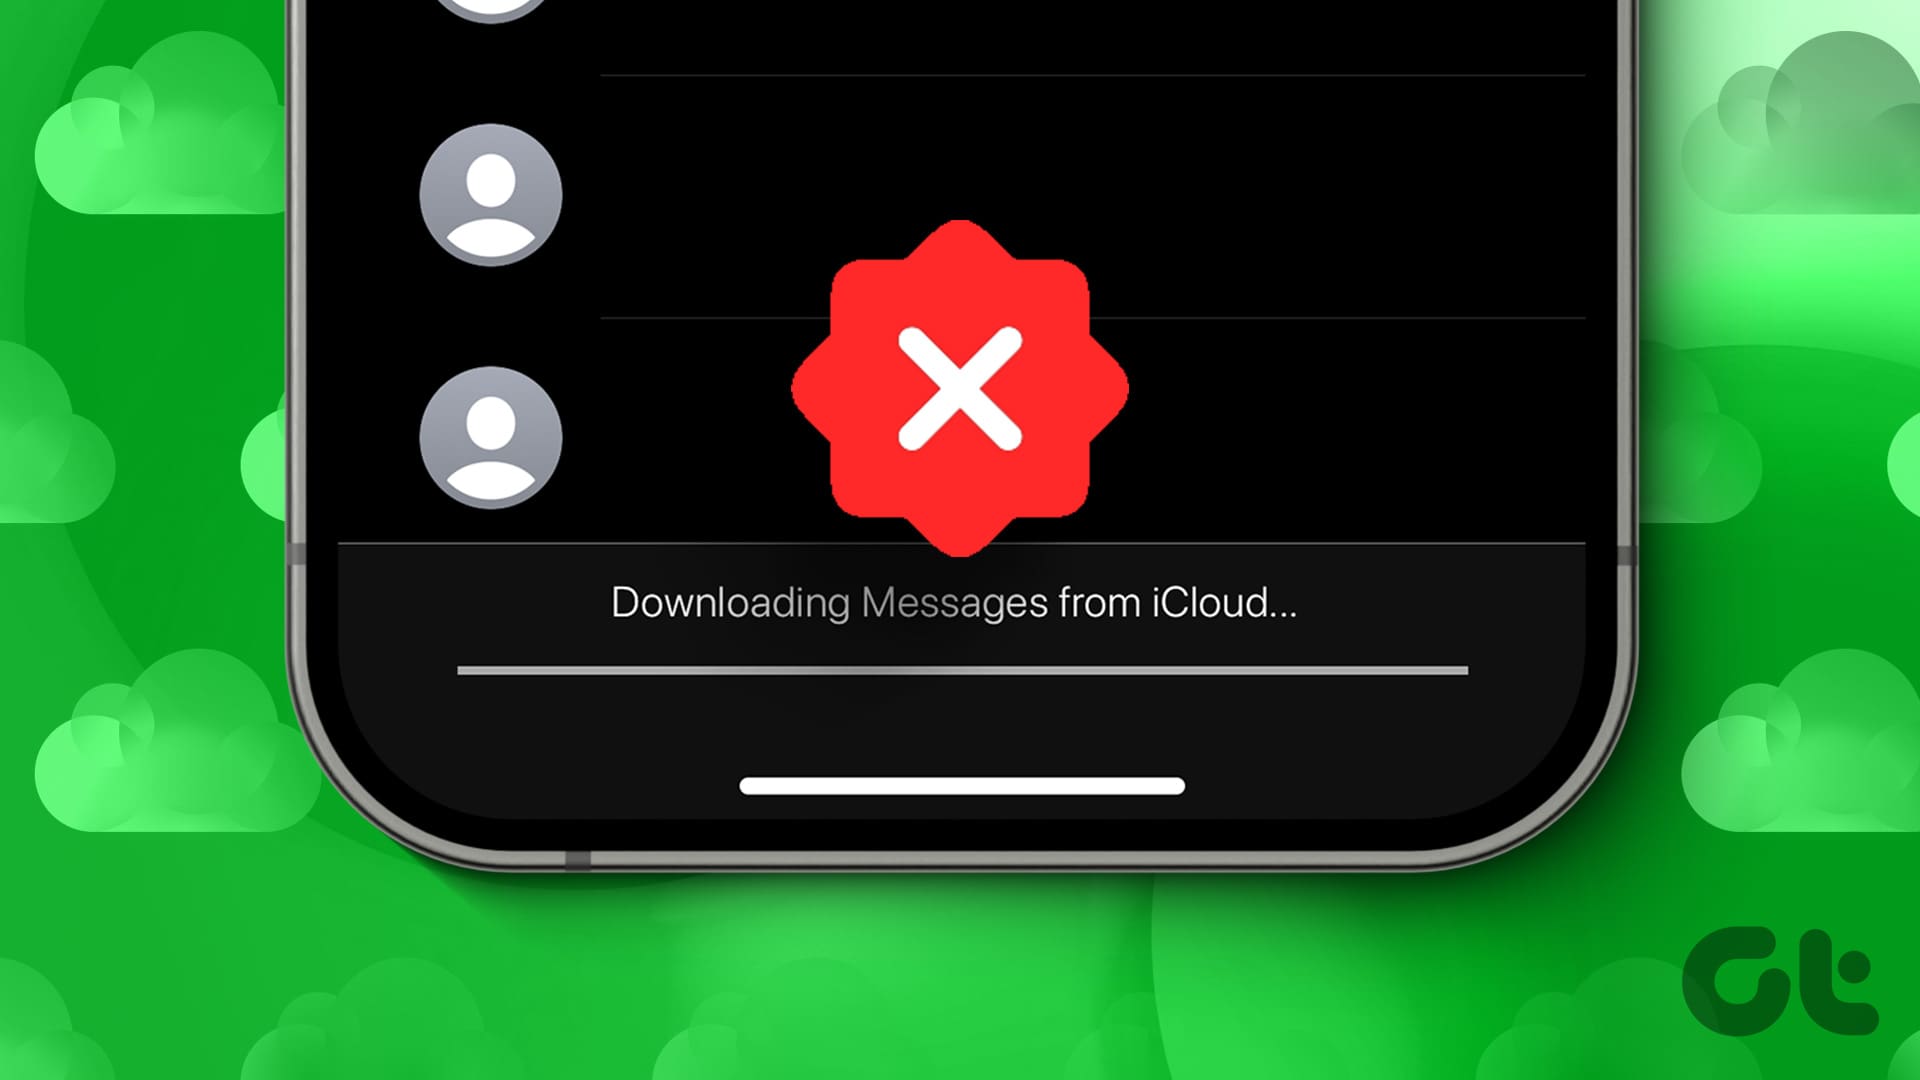 Top Fixes for iPhone Stuck on Downloading Messages From iCloud